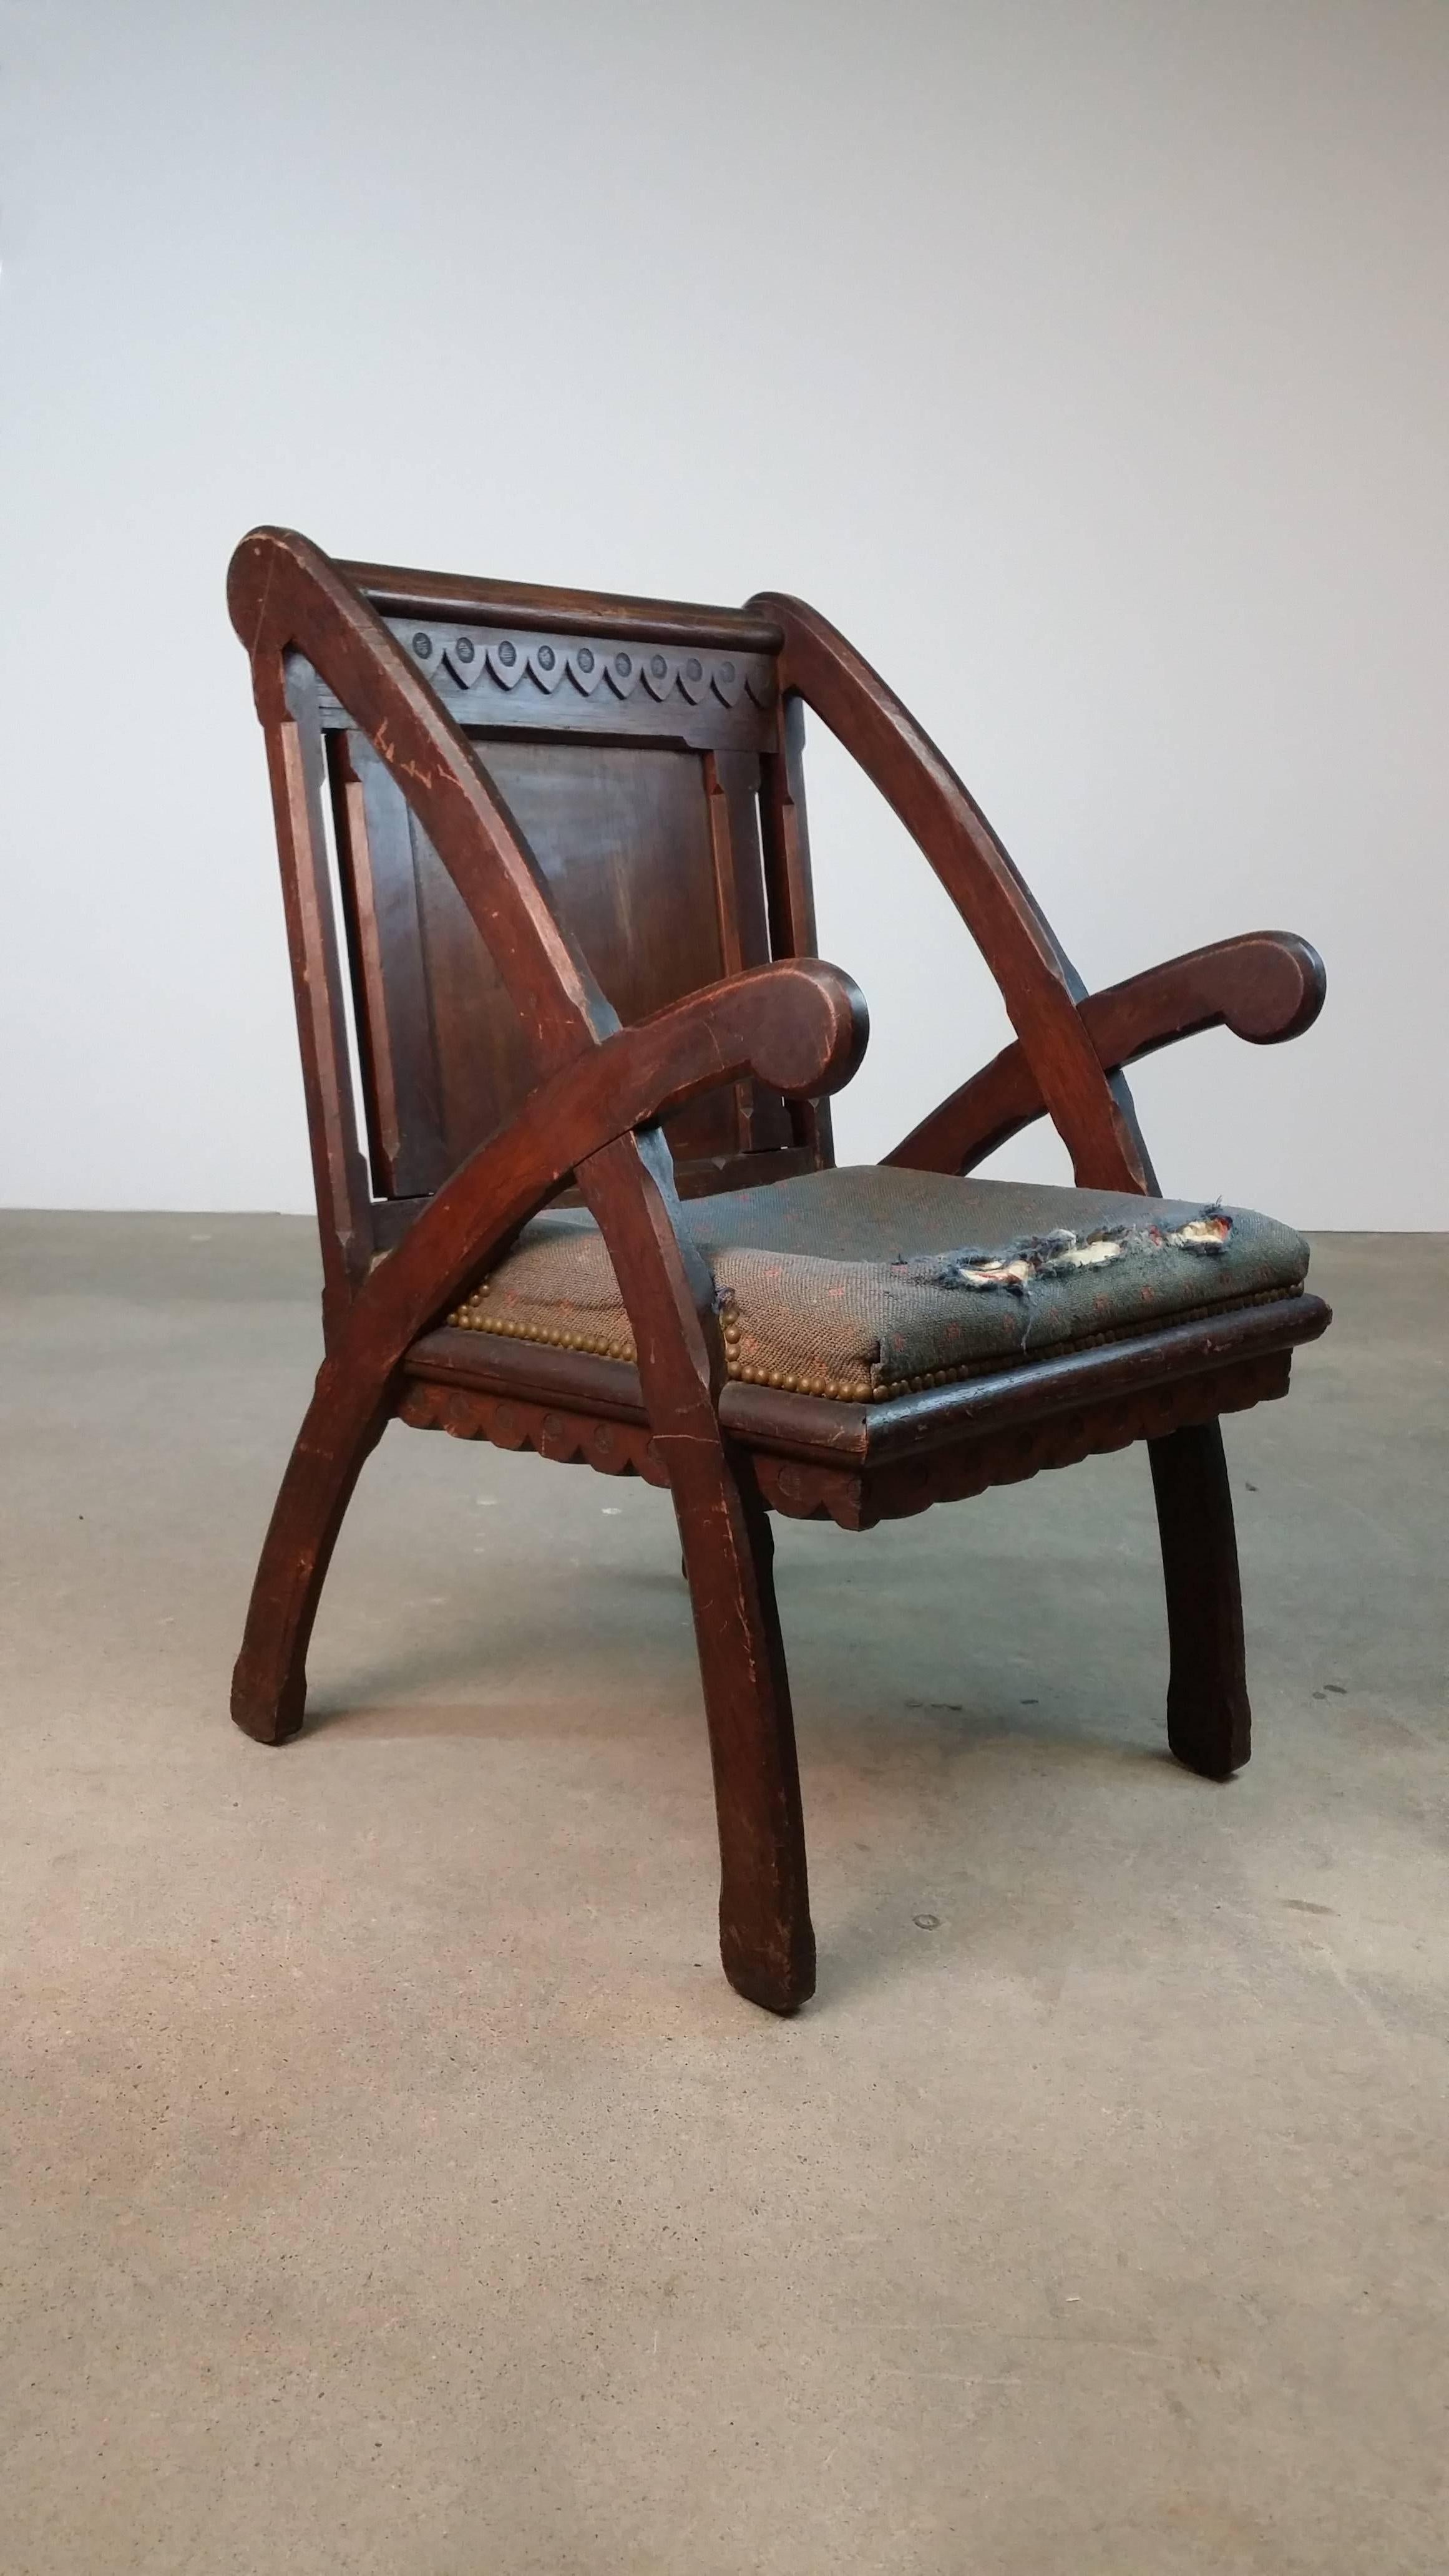 Exceedingly rare American Aesthetic Movement chair designed by Architect Henry Hobson Richardson. This chair is 